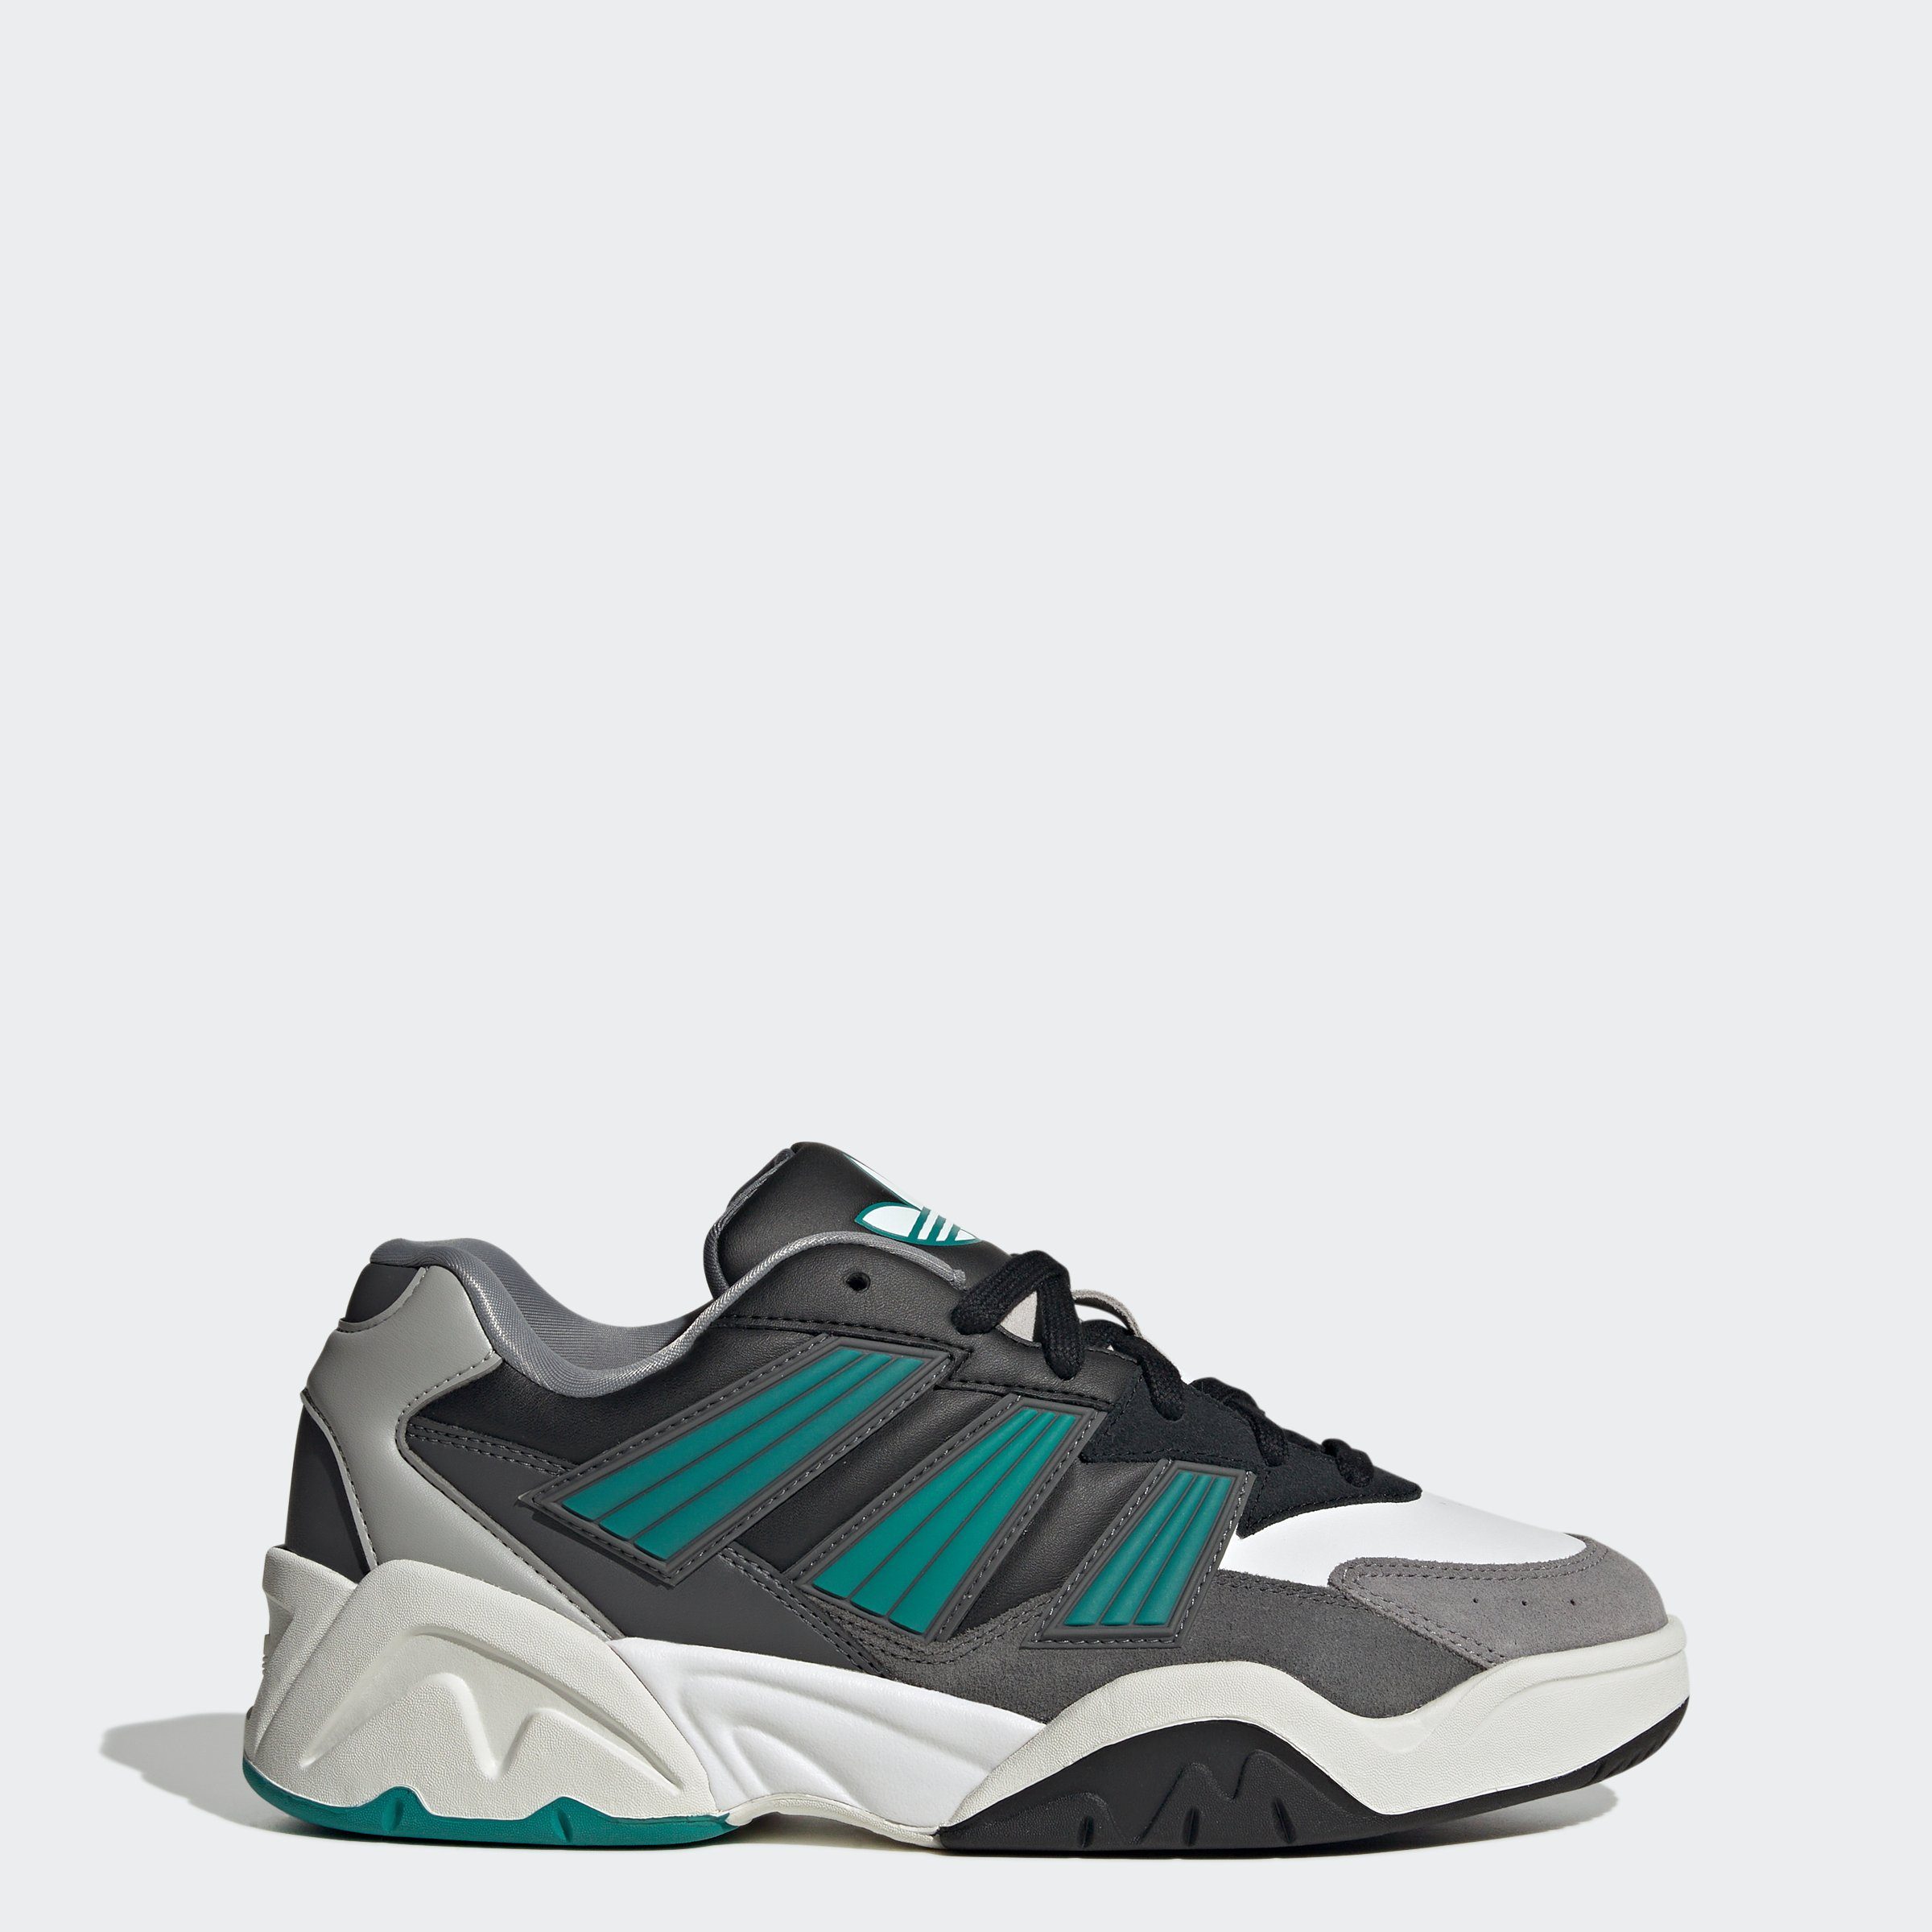 adidas Originals COURT Crystal White / Sneaker / Green Cloud White MAGNETIC Eqt